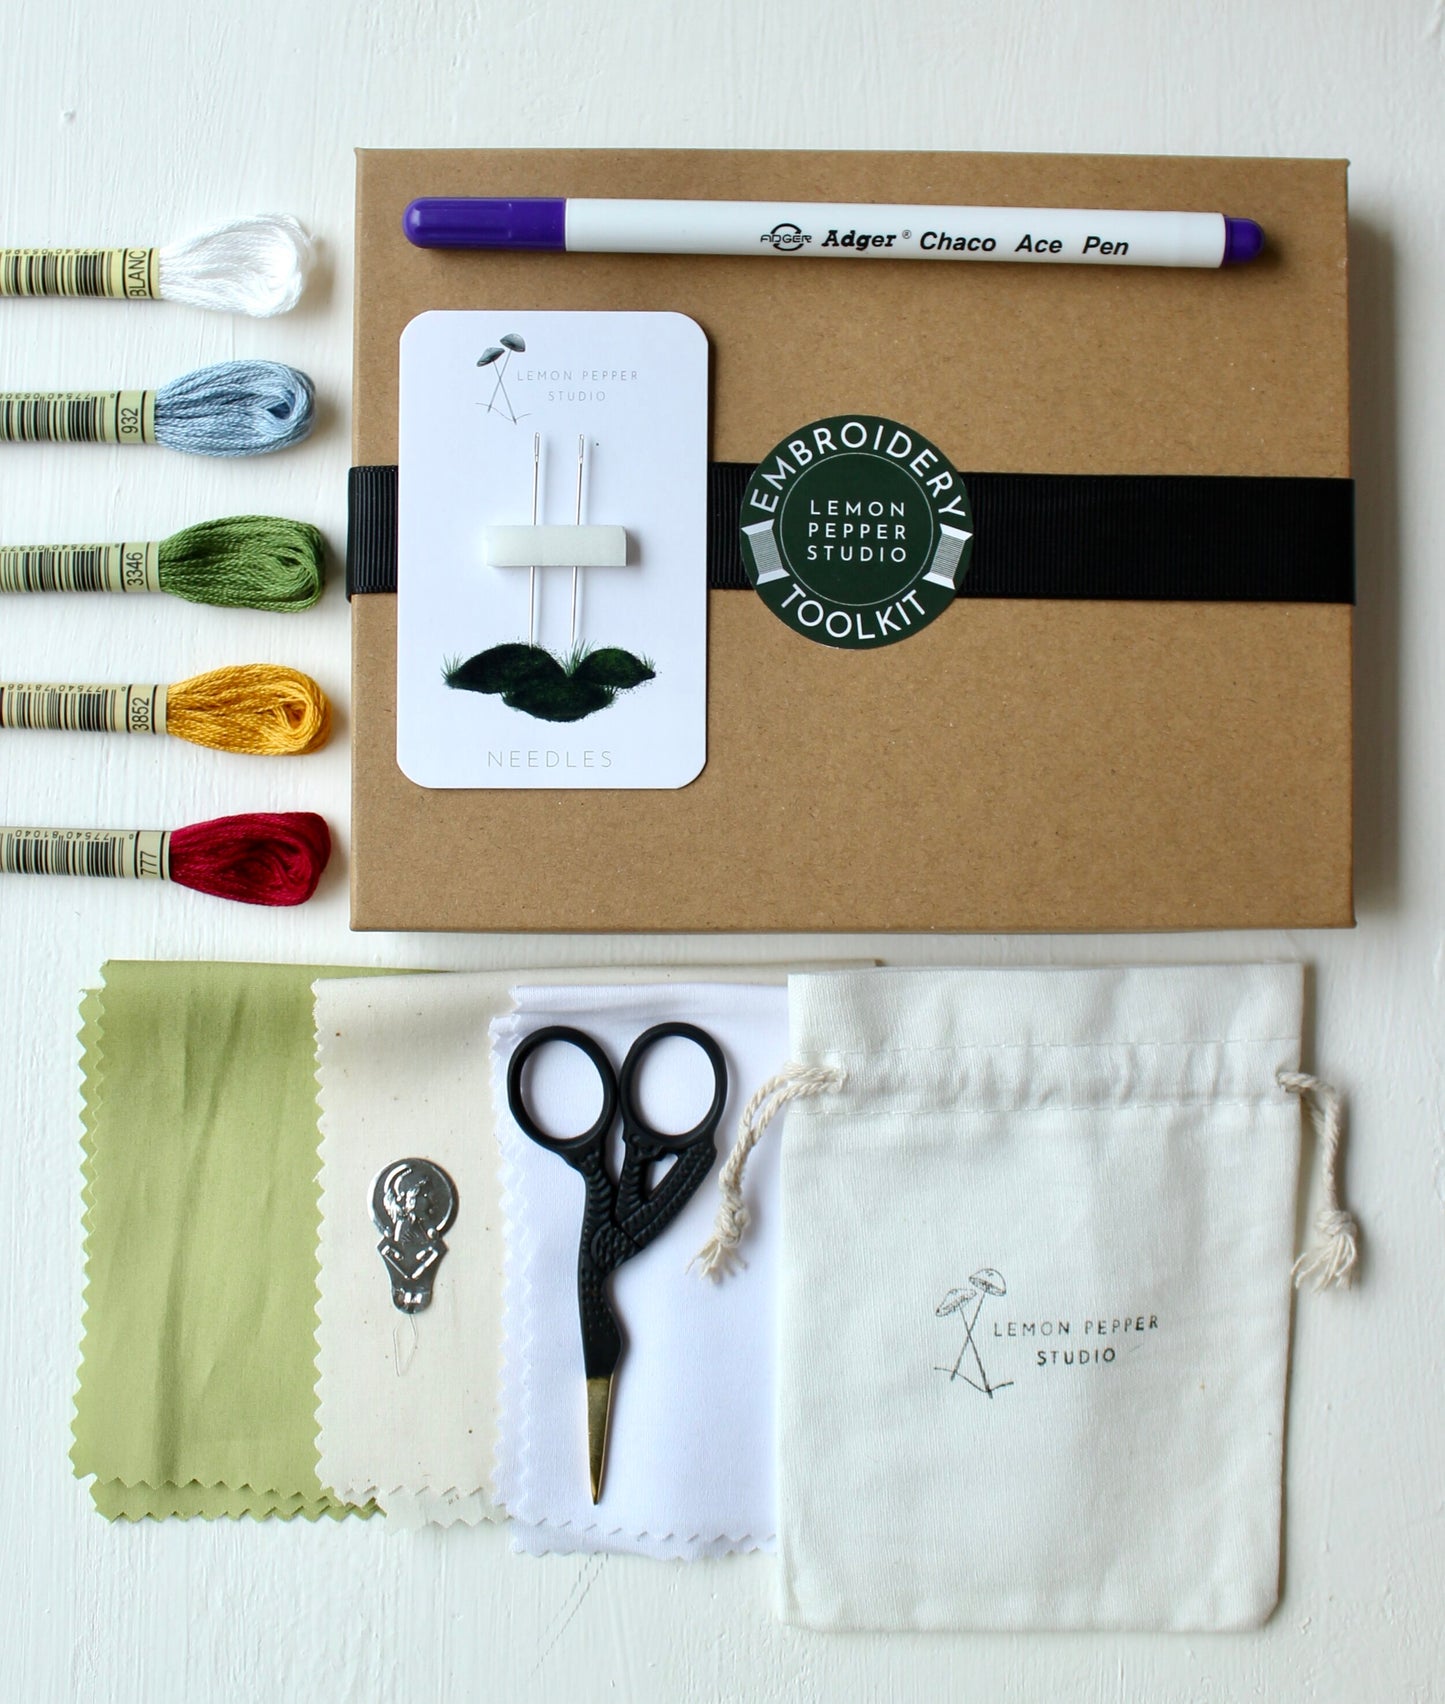 Embroidery Toolkit